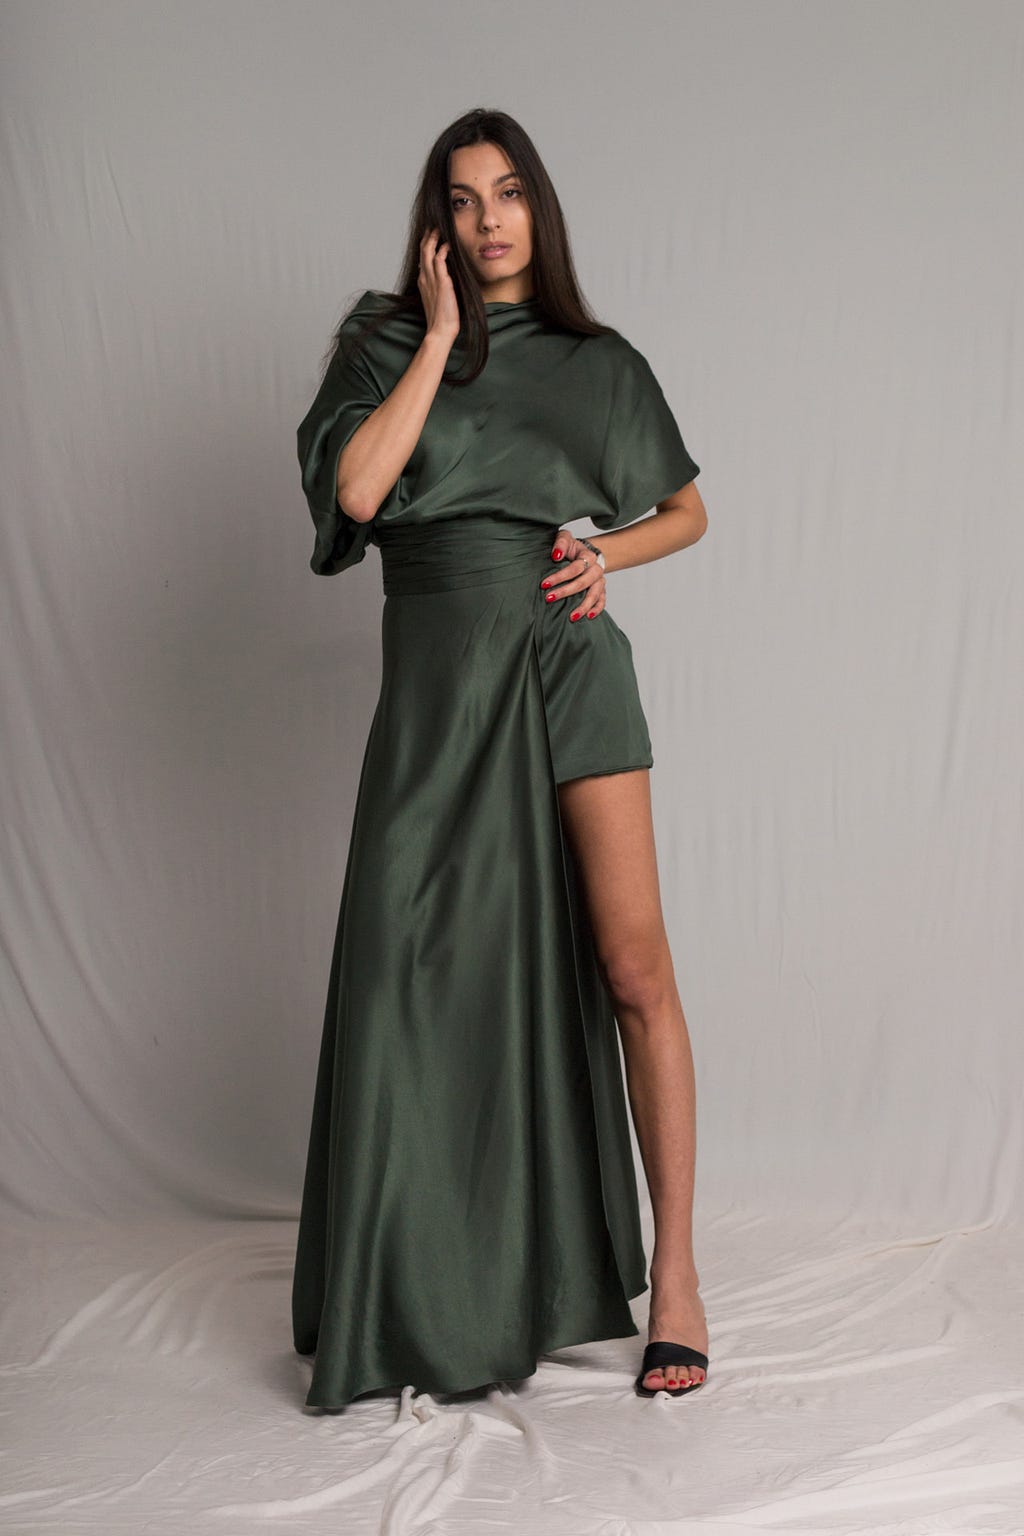 Bastet Noir made to measure olive satin dress with asymmetrical skirt, cowl neckline, pleated wist detail and a side zipper